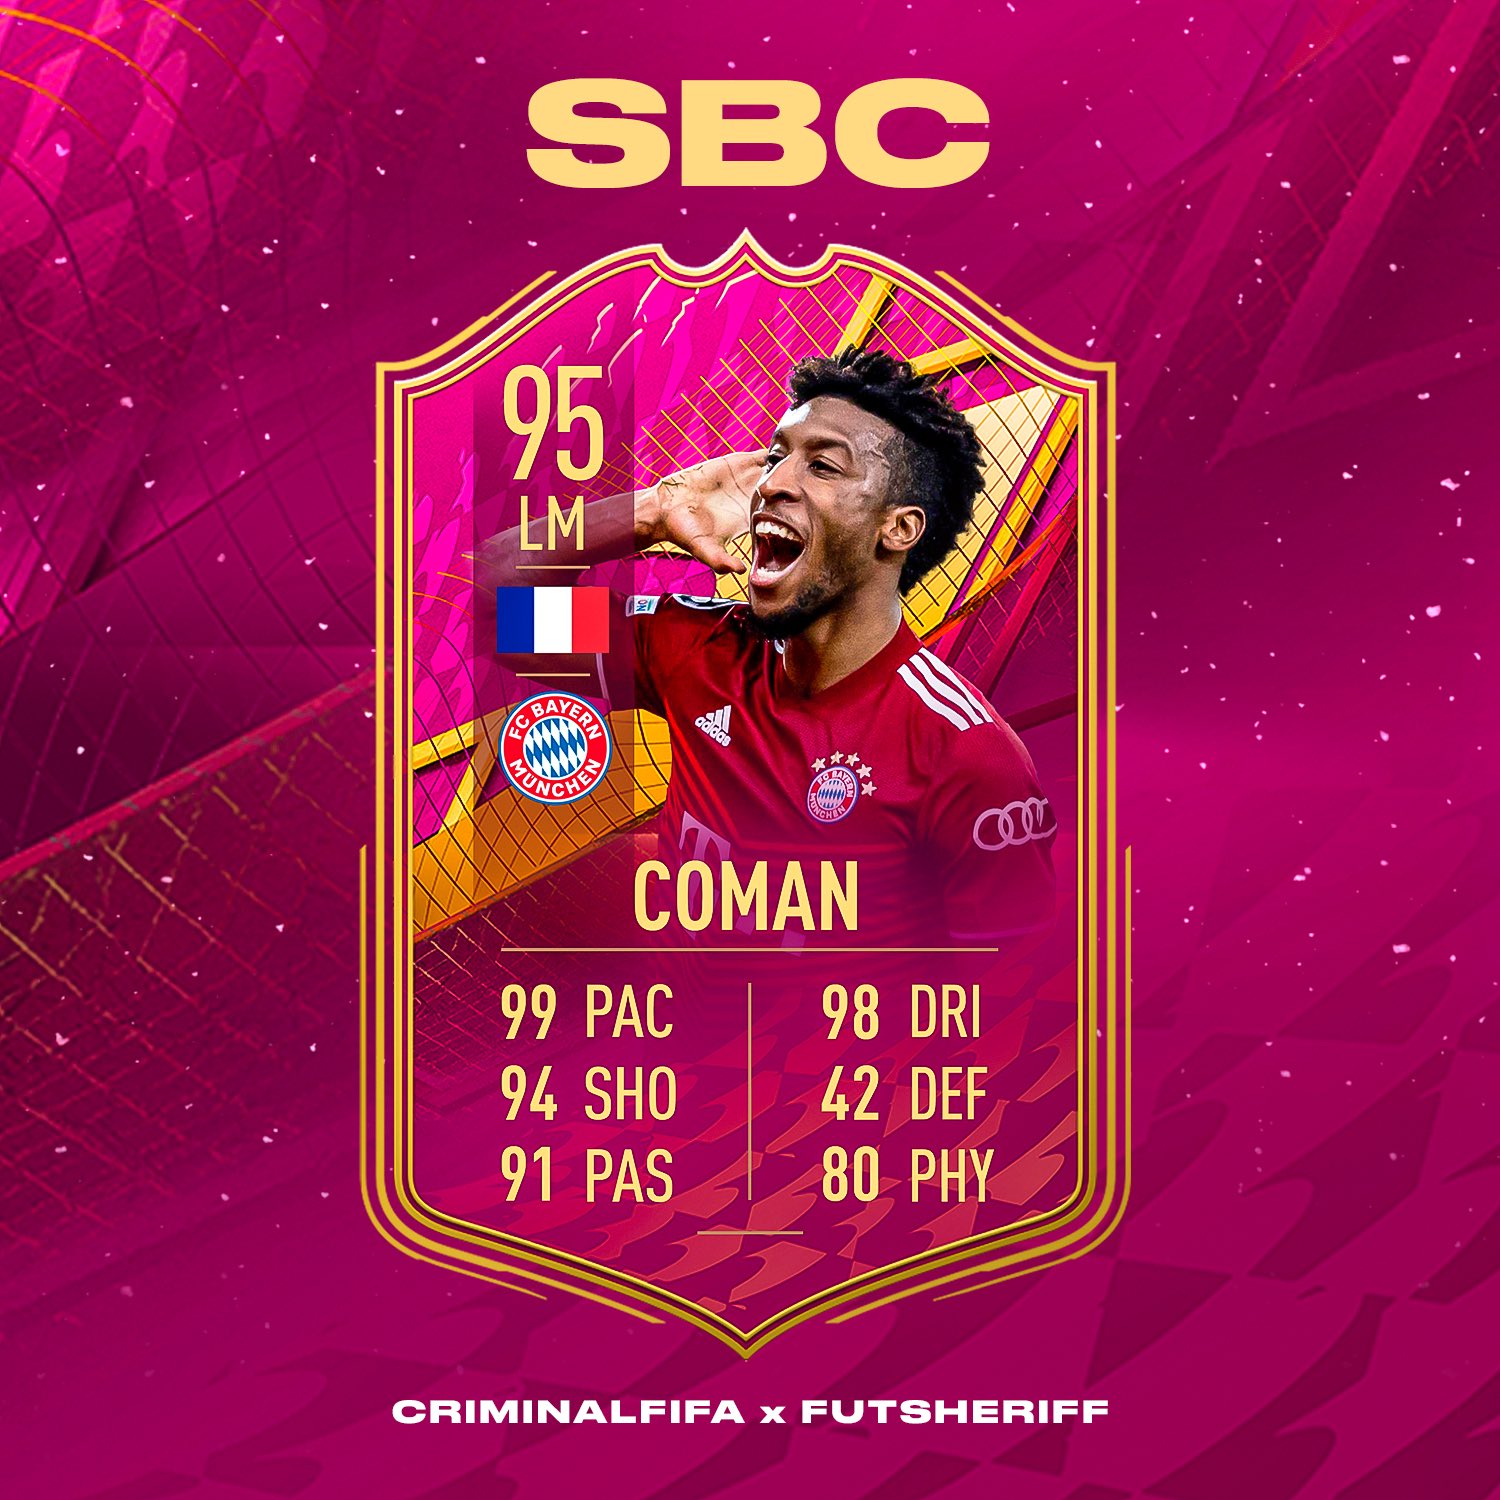 FUT Sheriff - Santi-Maximin 🇫🇷 is added to come as